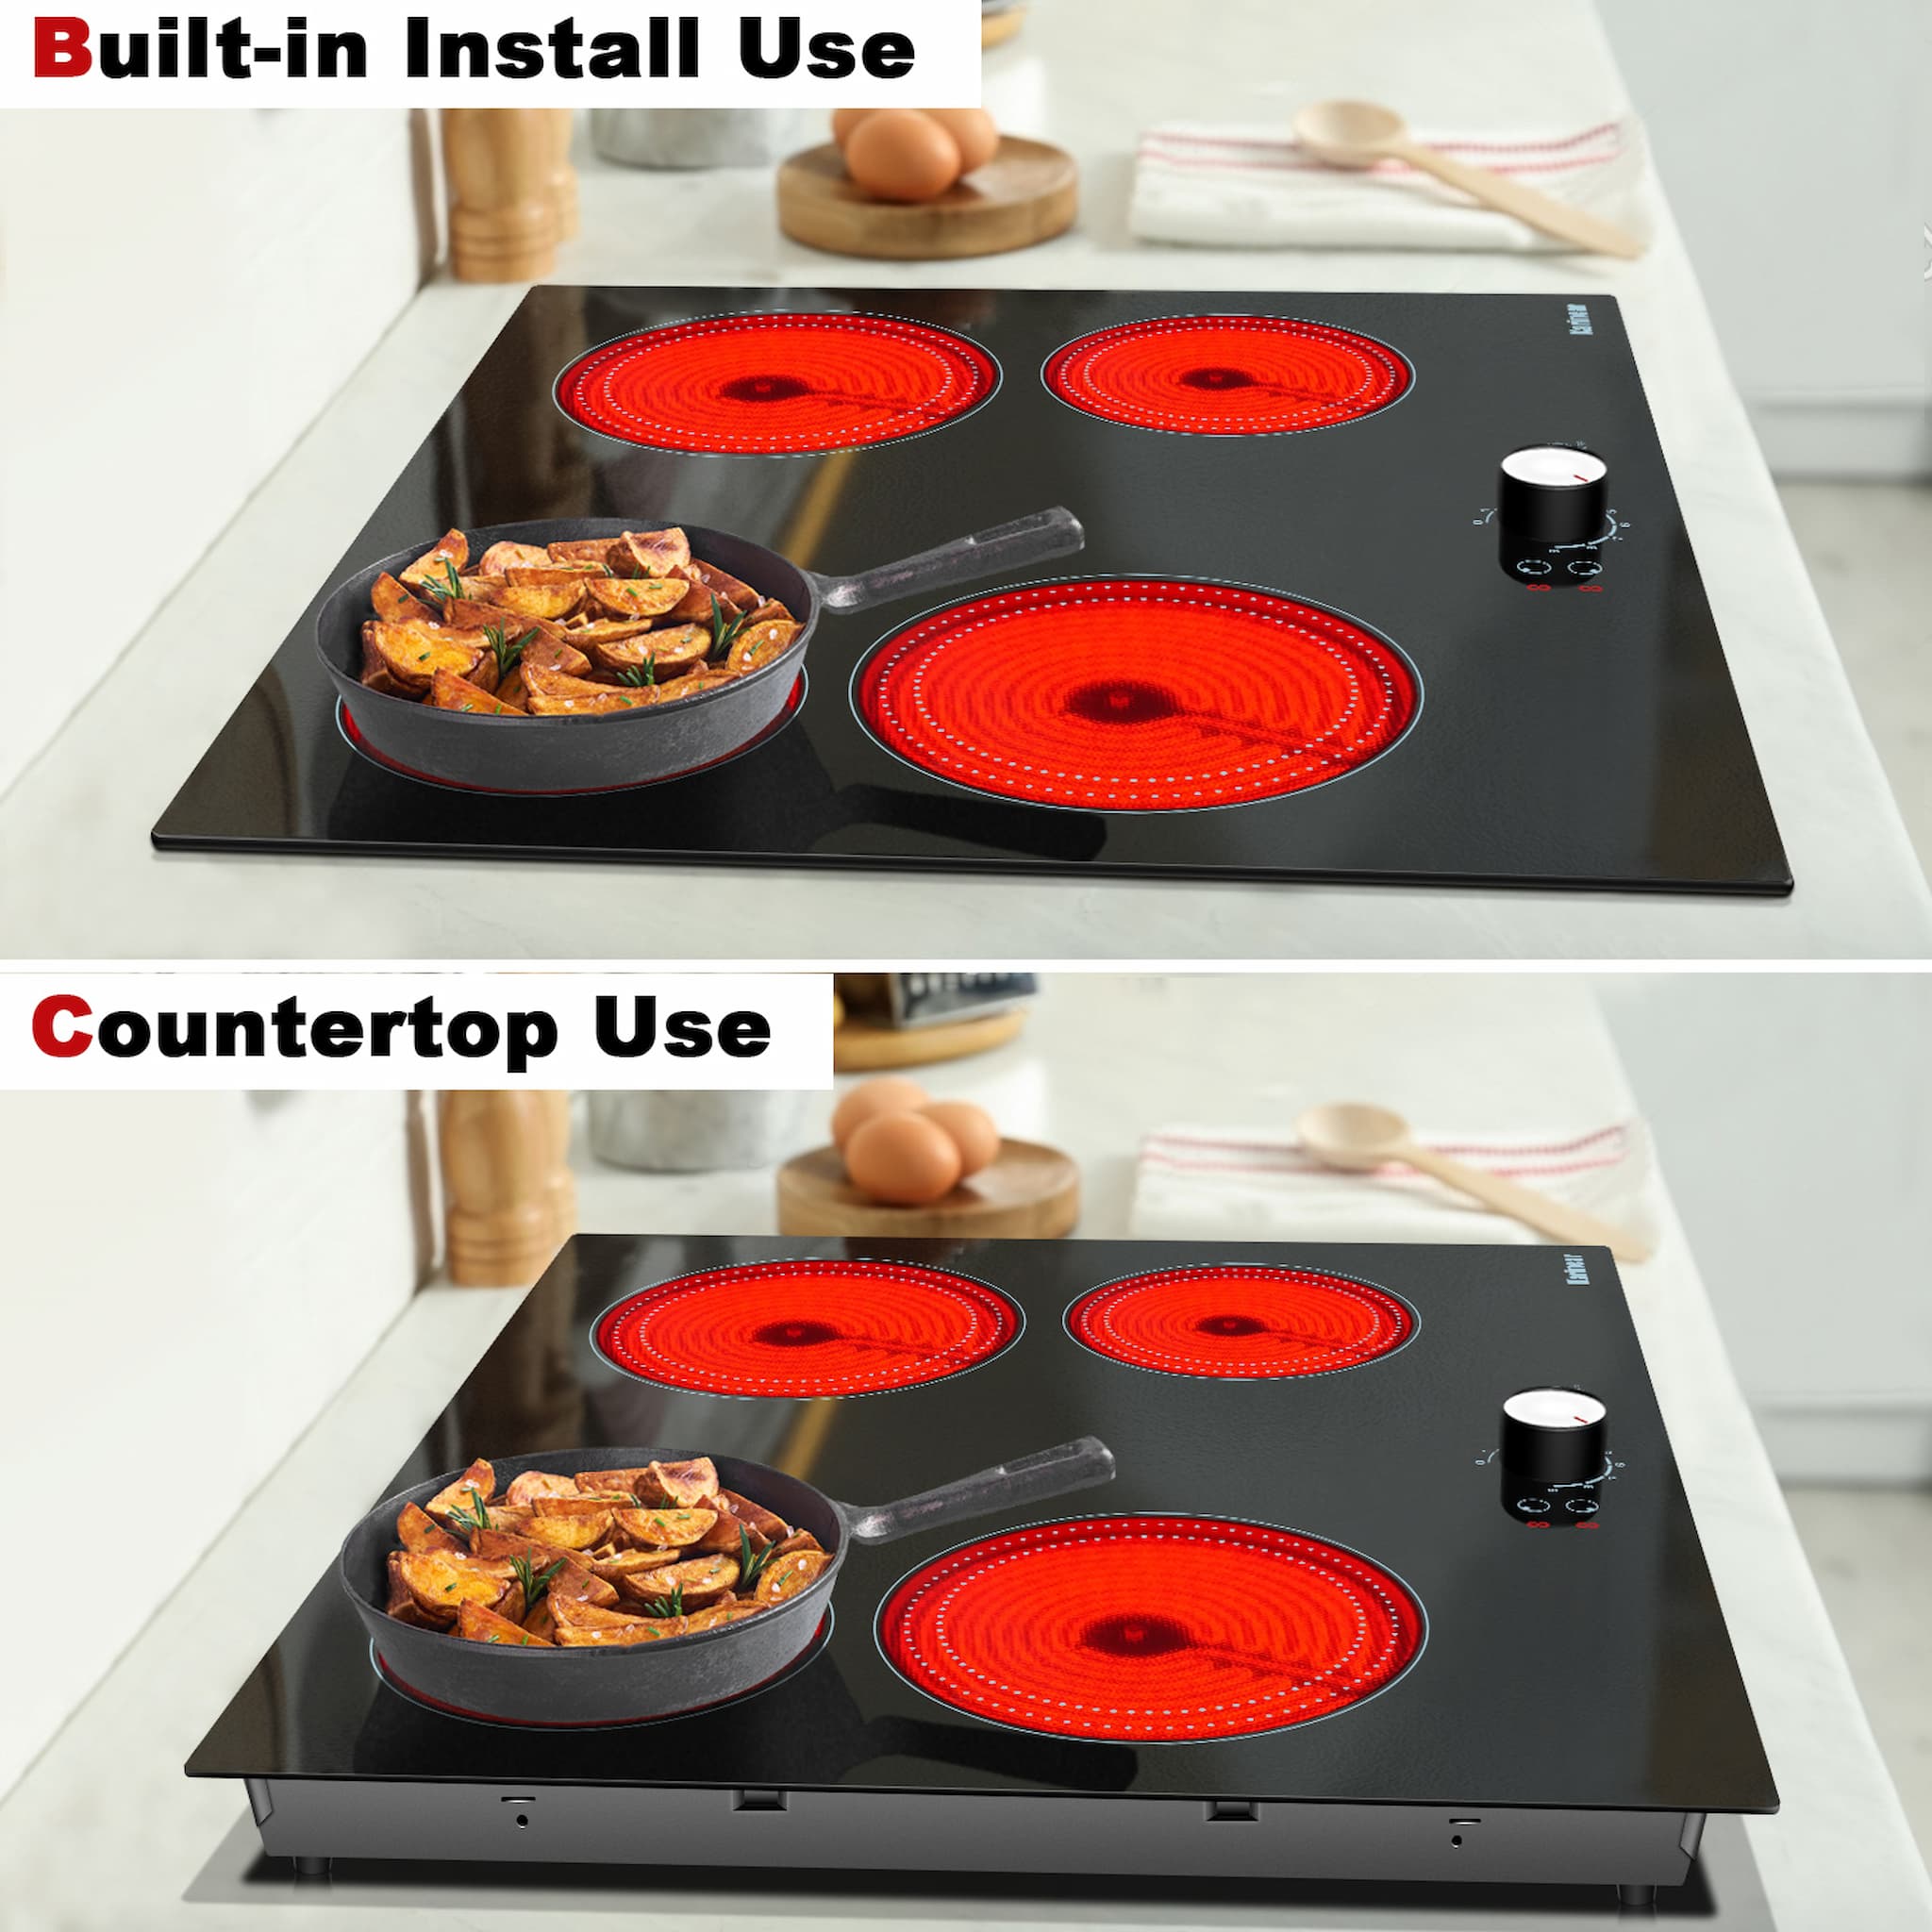 Karinear 2 Burner Electric Cooktop 110v, 12 Inch Portable Electric Stove  Top with Knob Control, Outlet Plug, Countertop Use or Drop-in Radiant